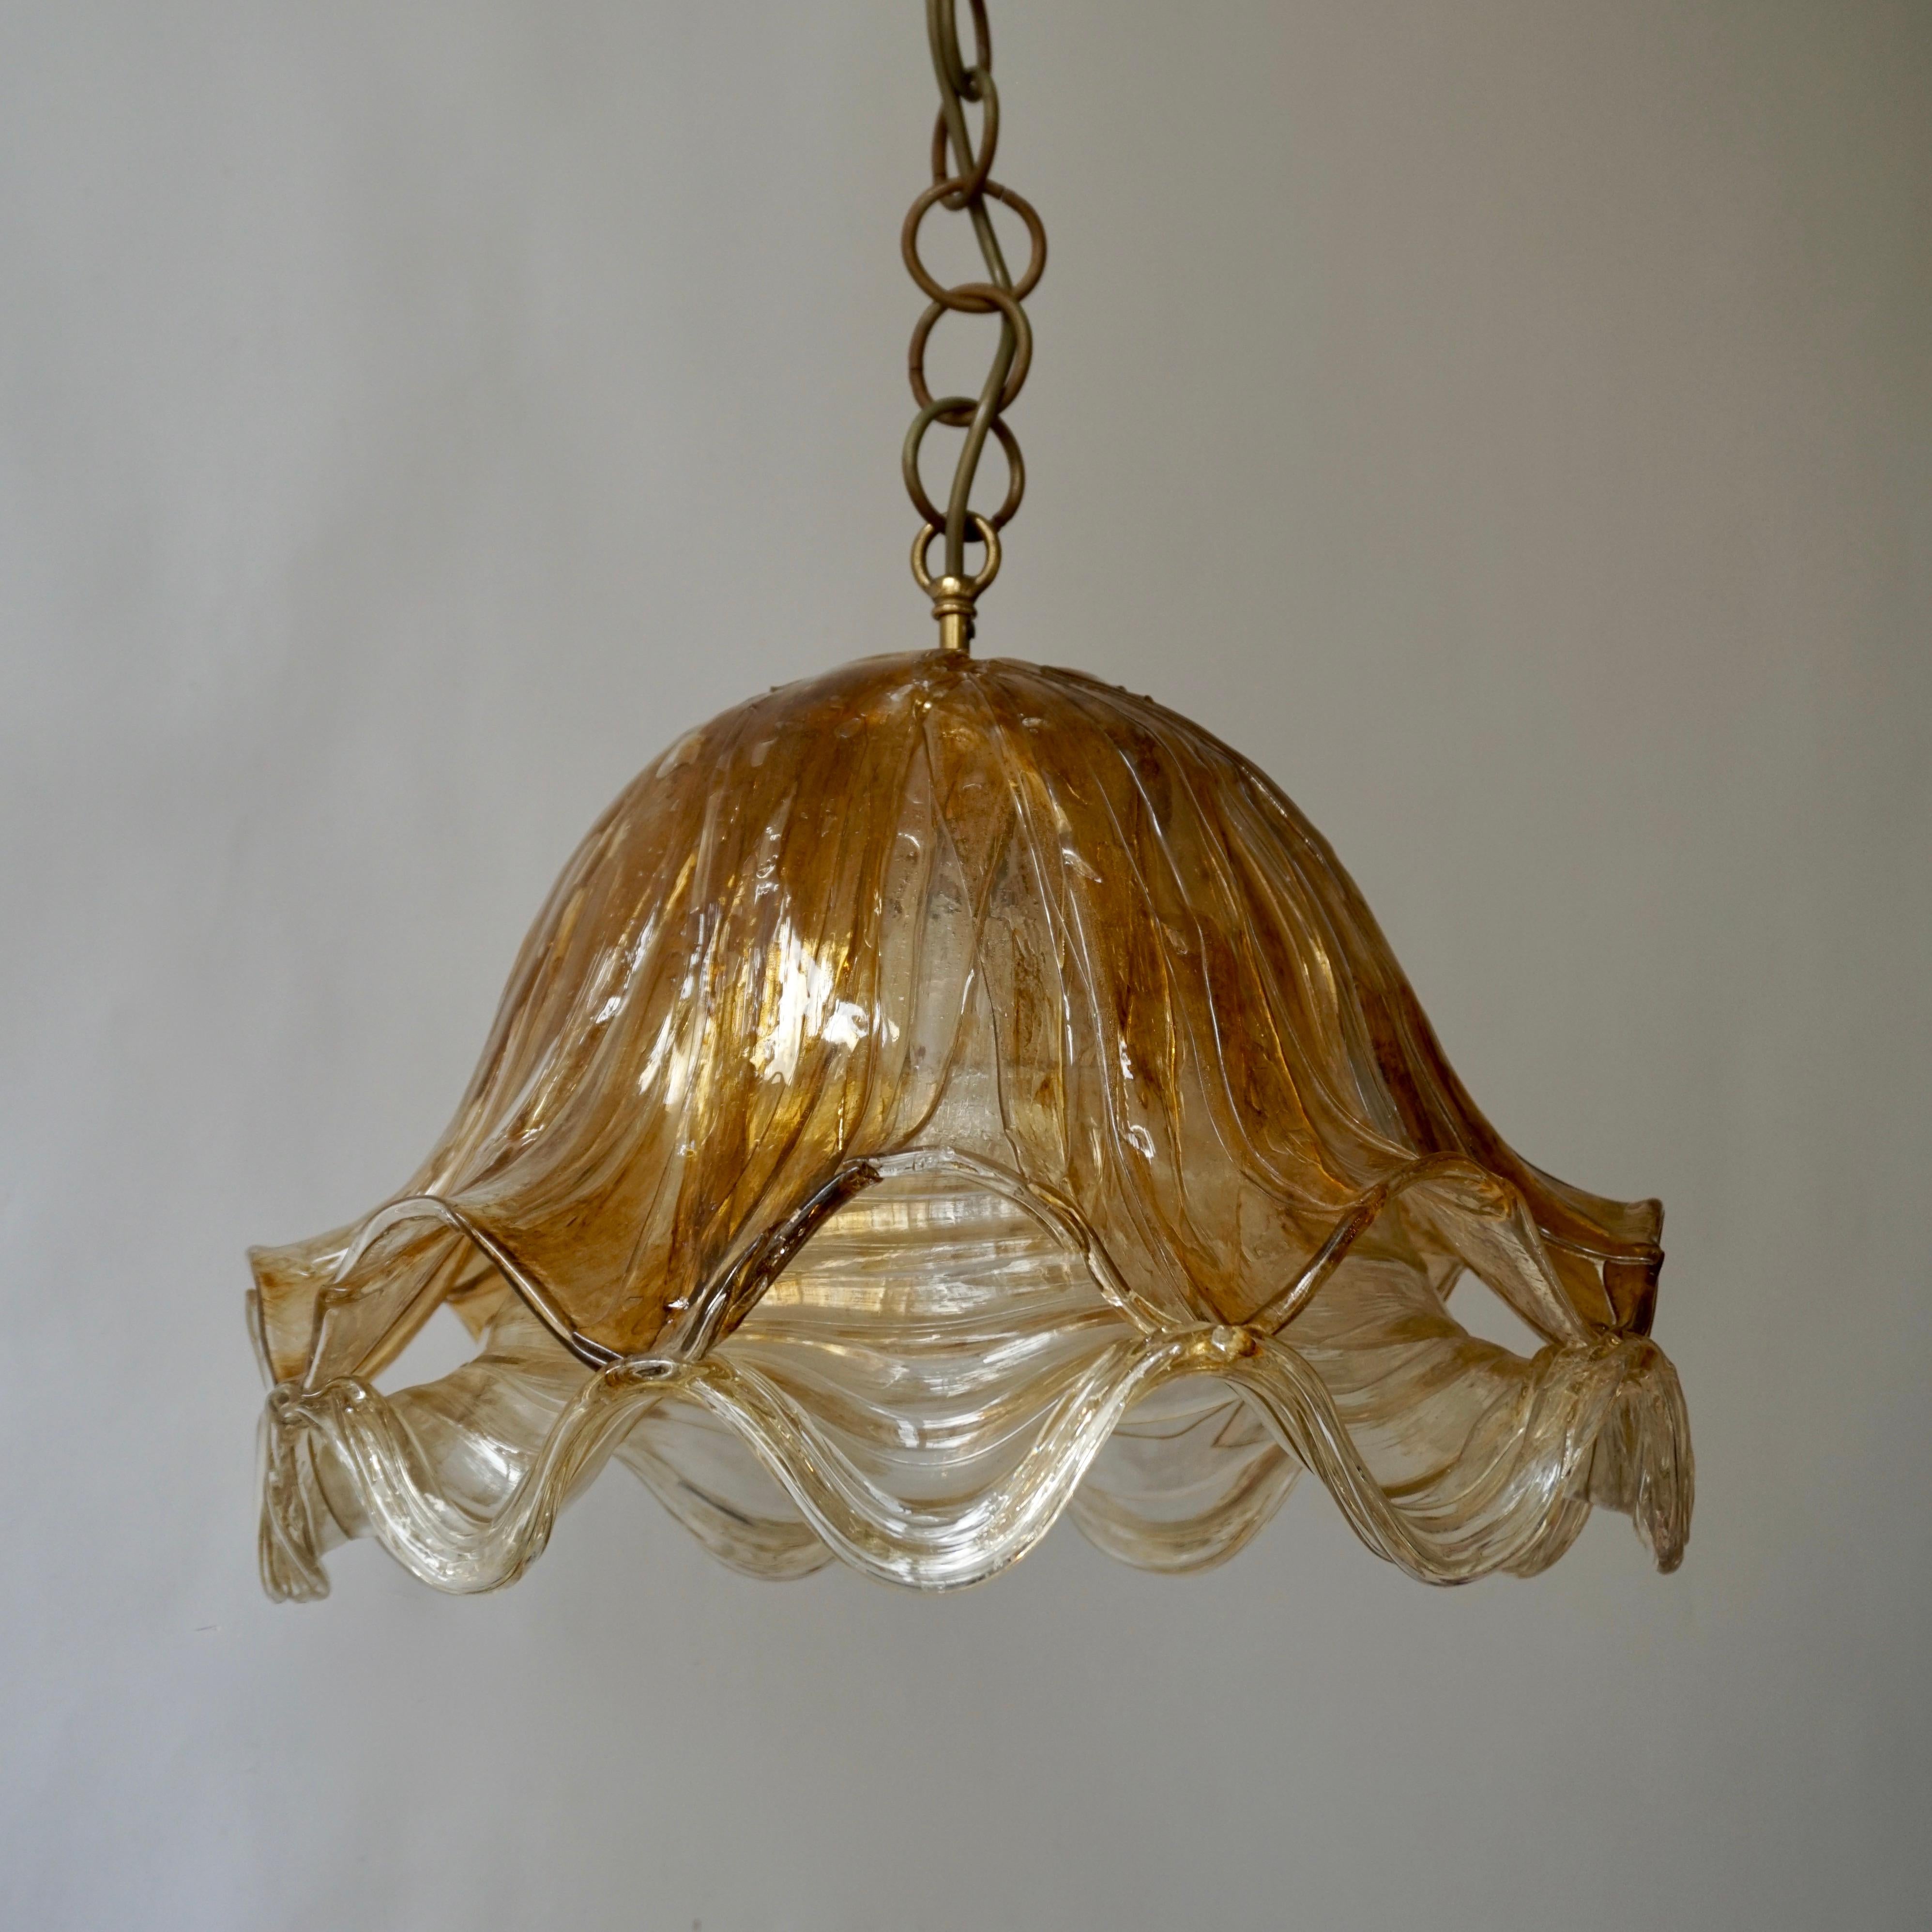 Brown and Transparent Acrylic Pendant Lamp, 1970s For Sale 1